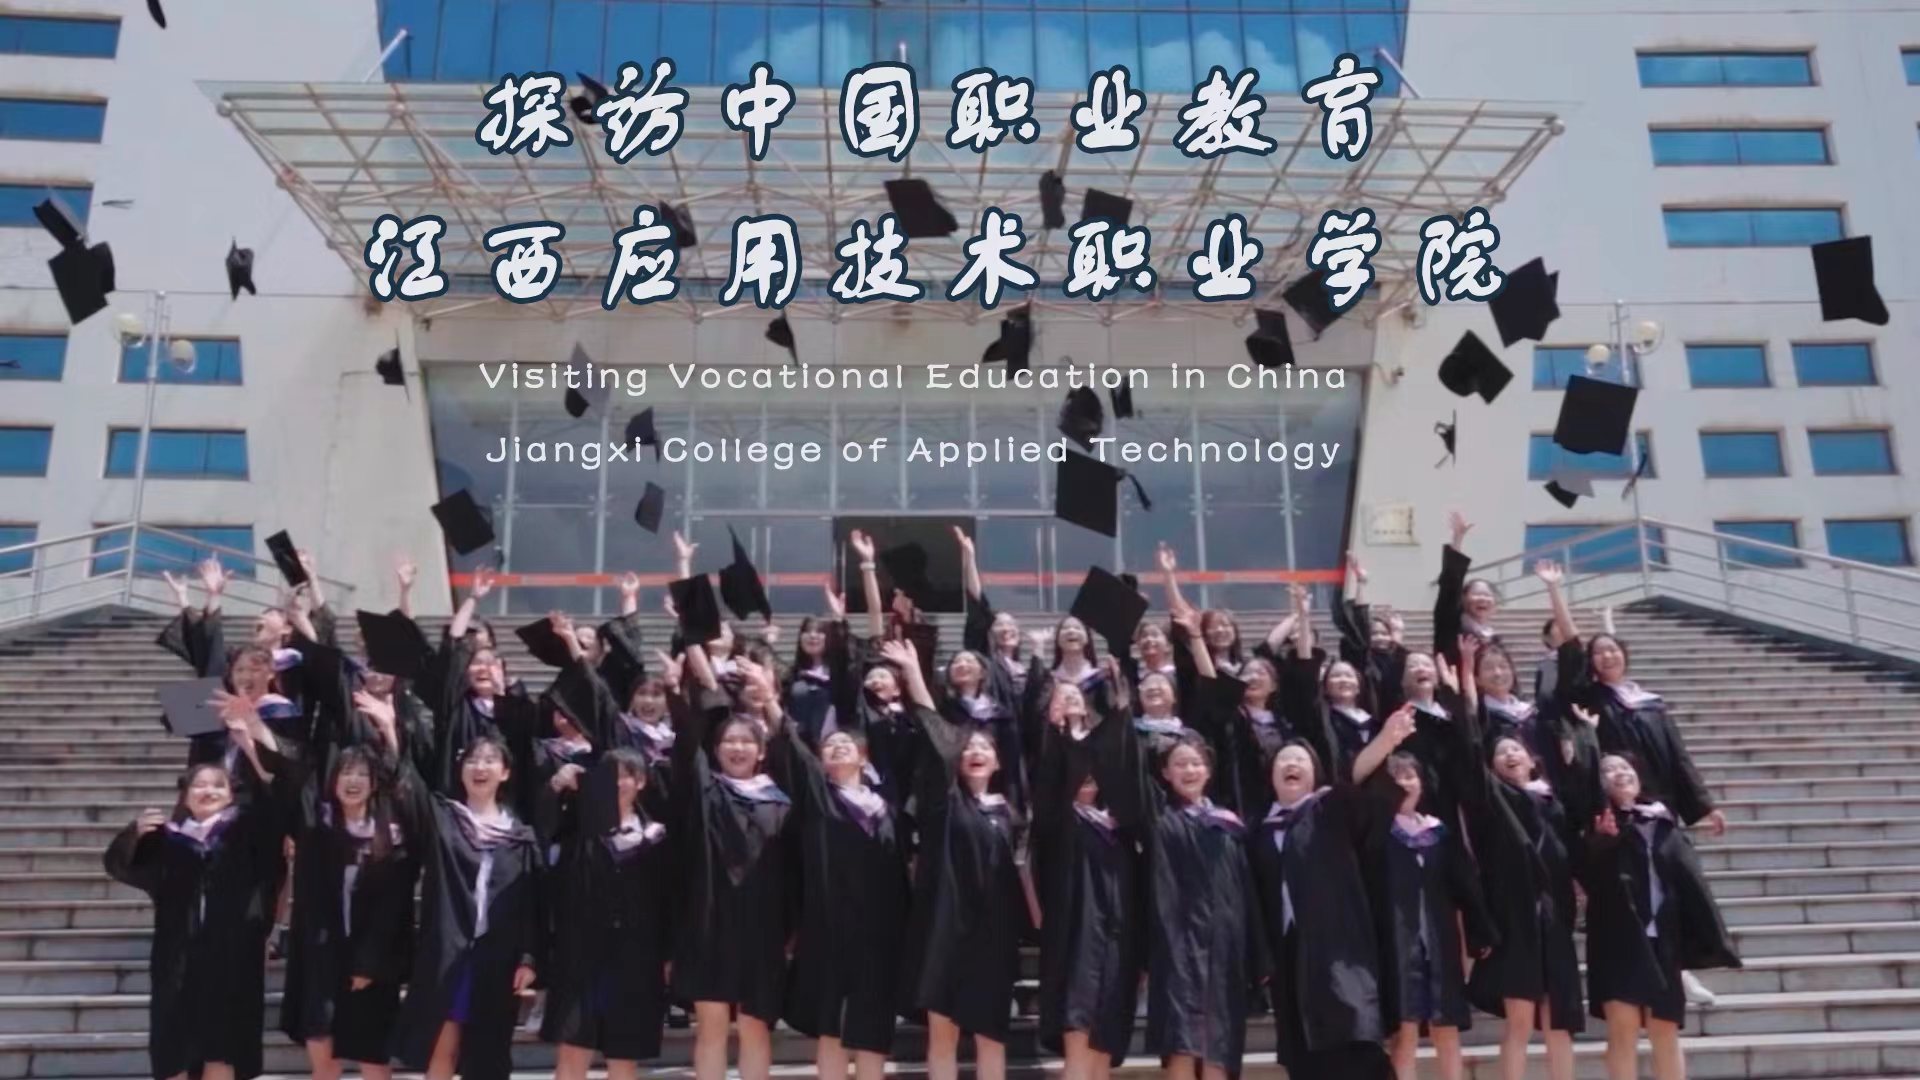 VisitingVocational Education in China--Jiangxi College of Applied Technology